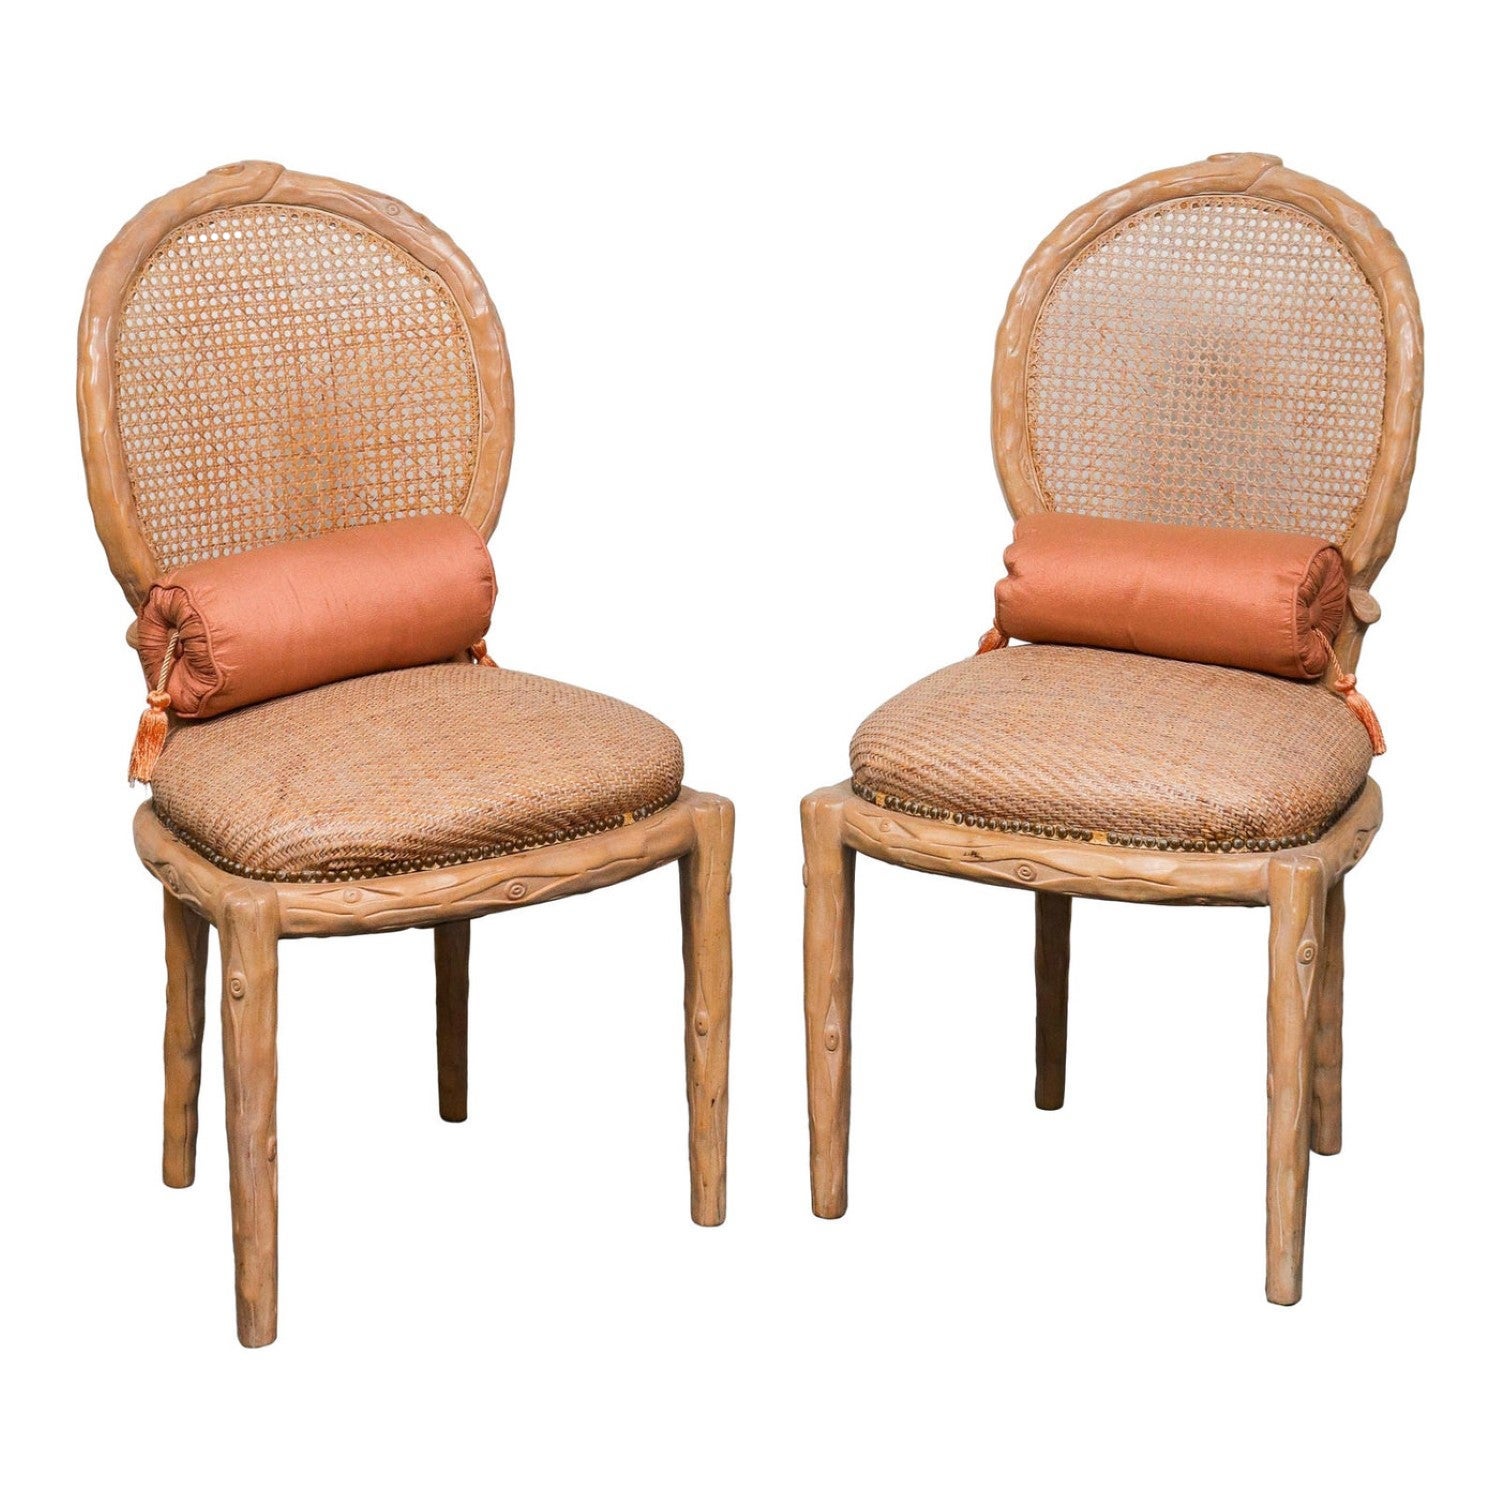 Faux Bois Caned Back Wicker Seat Side Chairs, Pr For Sale